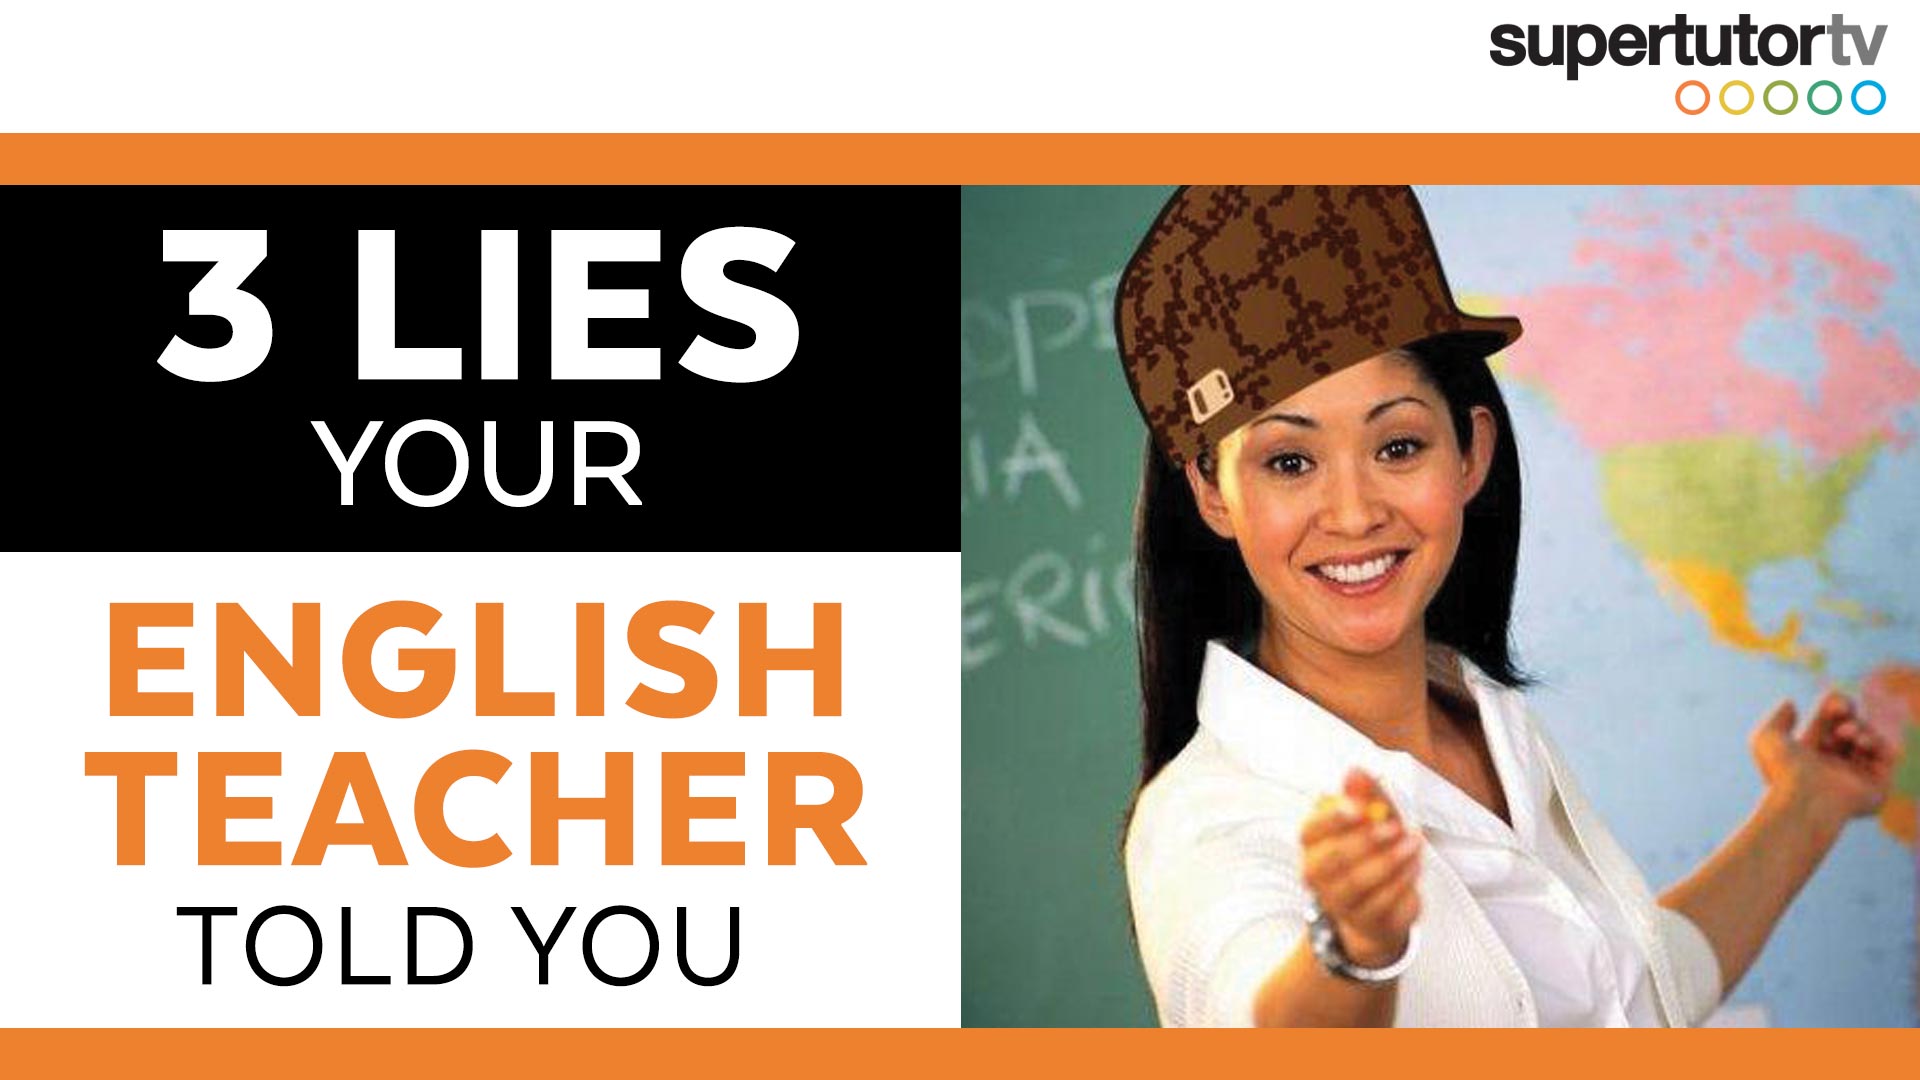 Your english getting better. You English. Your English teacher. Thumbnail : your English teacher. Tell a Lie to a teacher.